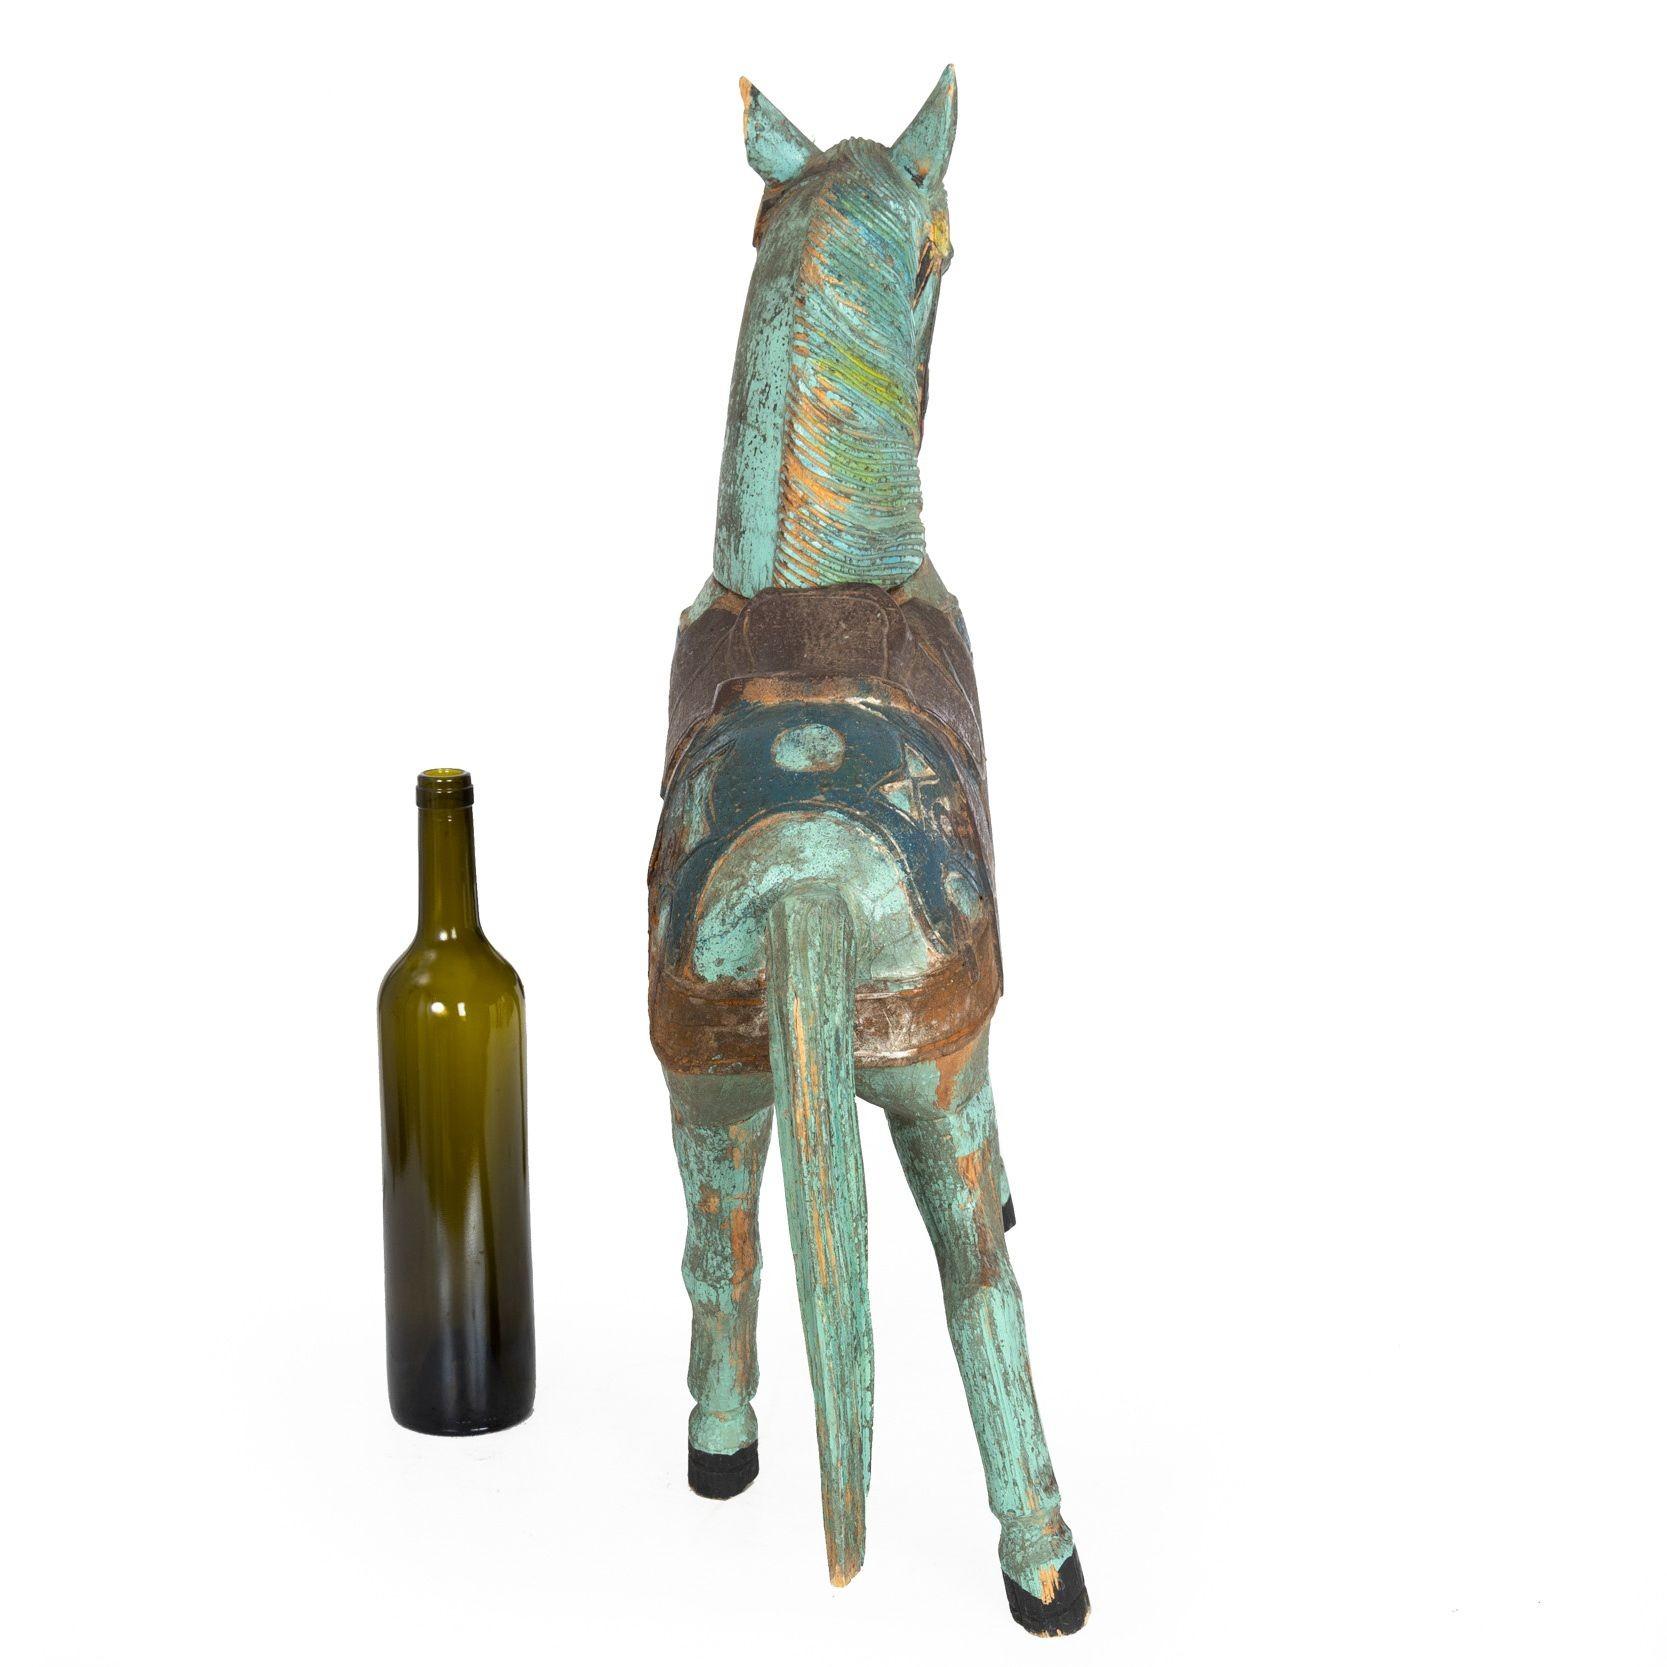 20th Century Folk Art Beautifully Hand Carved and Painted Horse Sculpture, United States